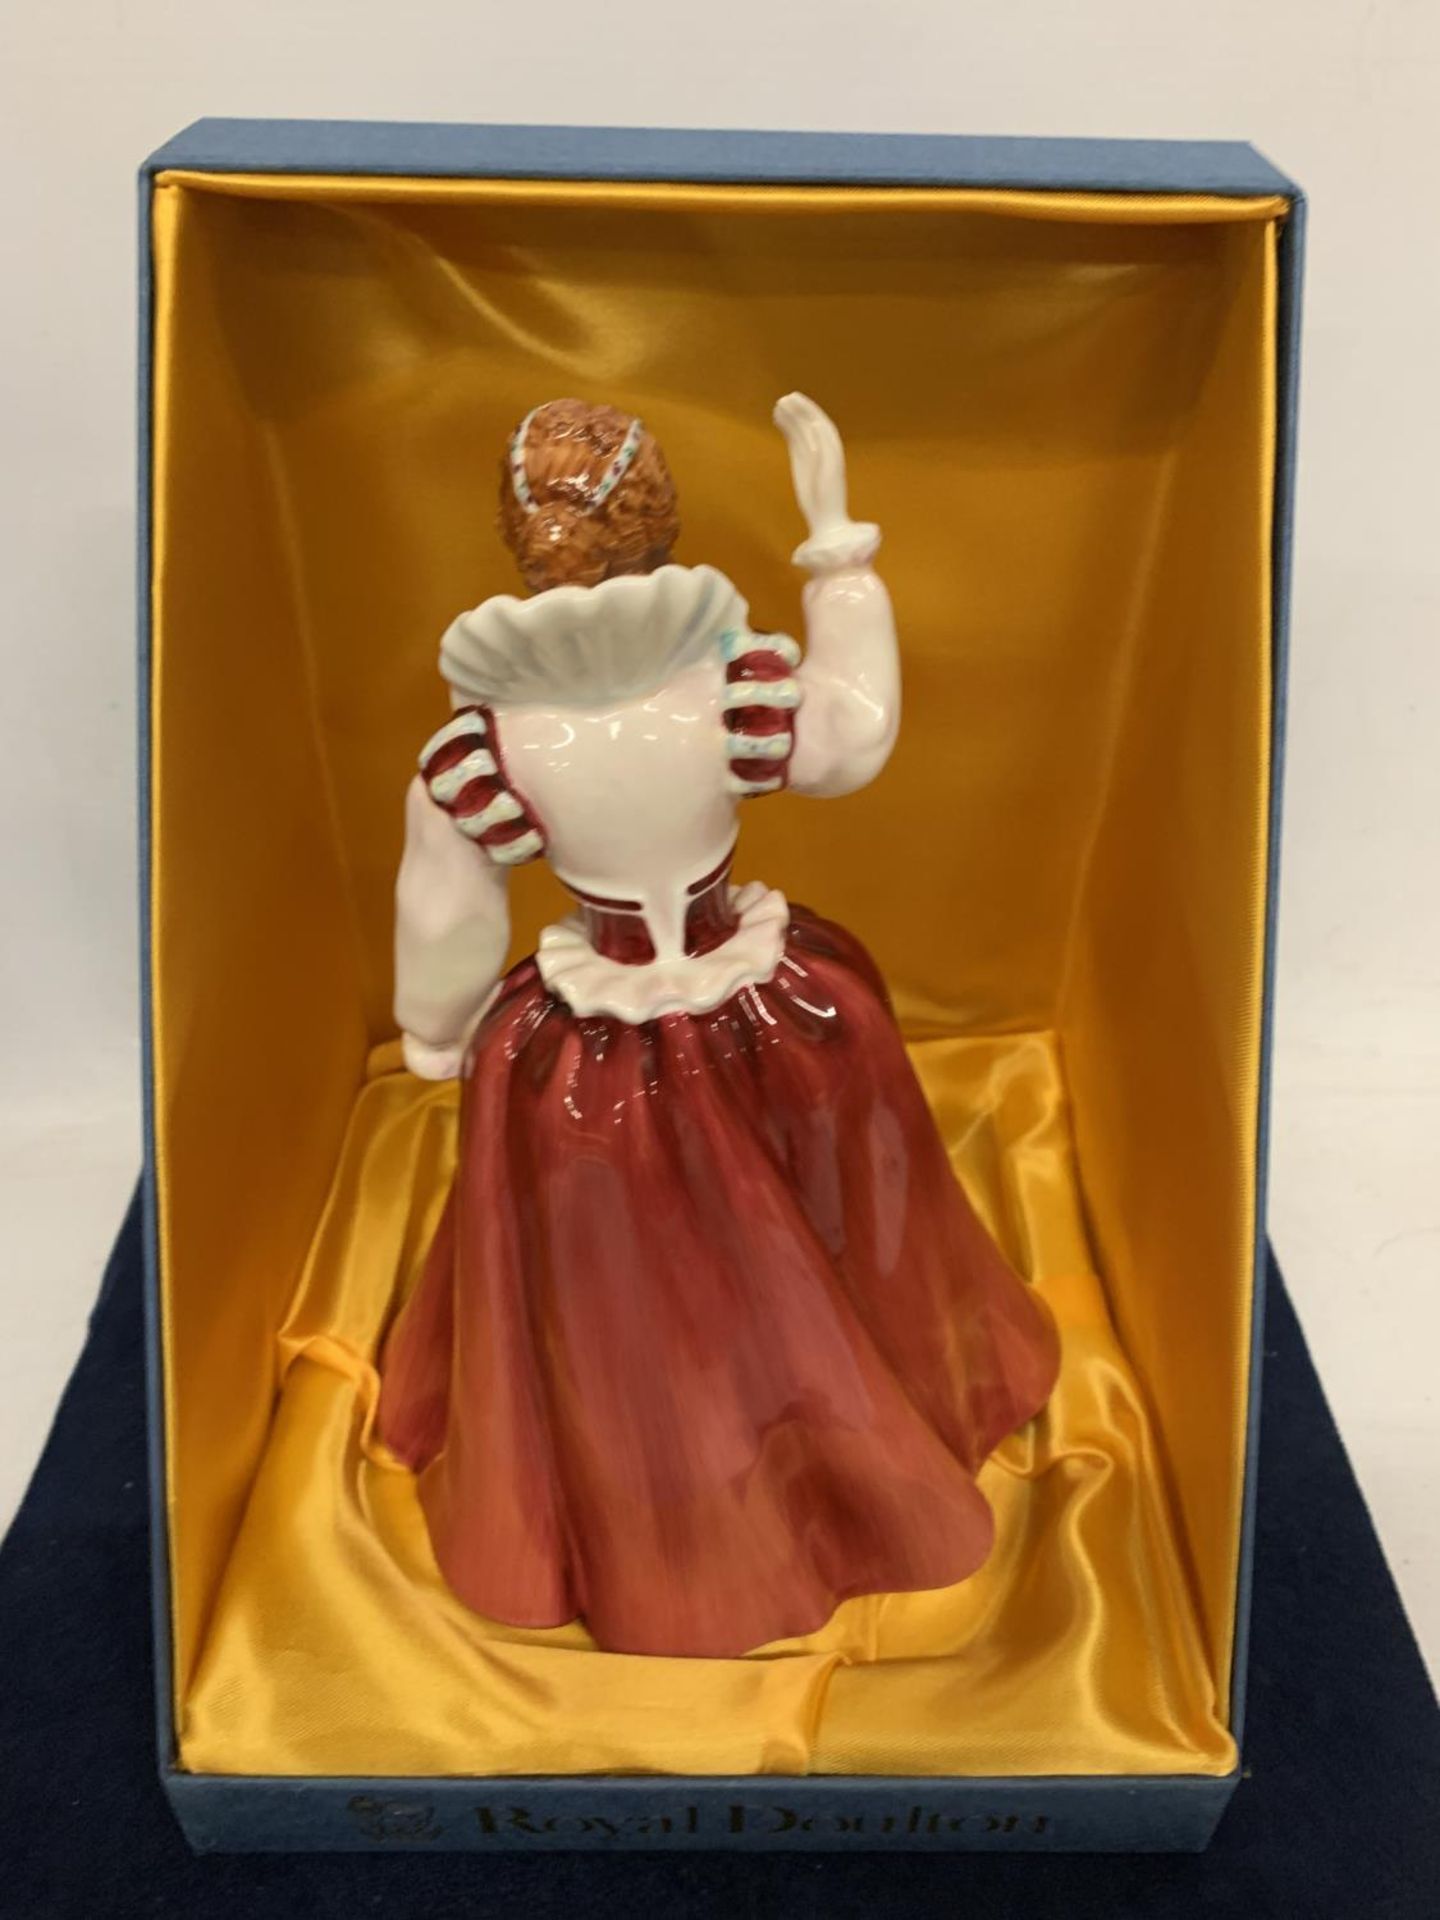 A LIMITED EDITION NO 2176/5000 BOXED ROYAL DOULTON FIGURE QUEENS OF THE REALMS QUEEN ELIZABETH I - Image 2 of 3